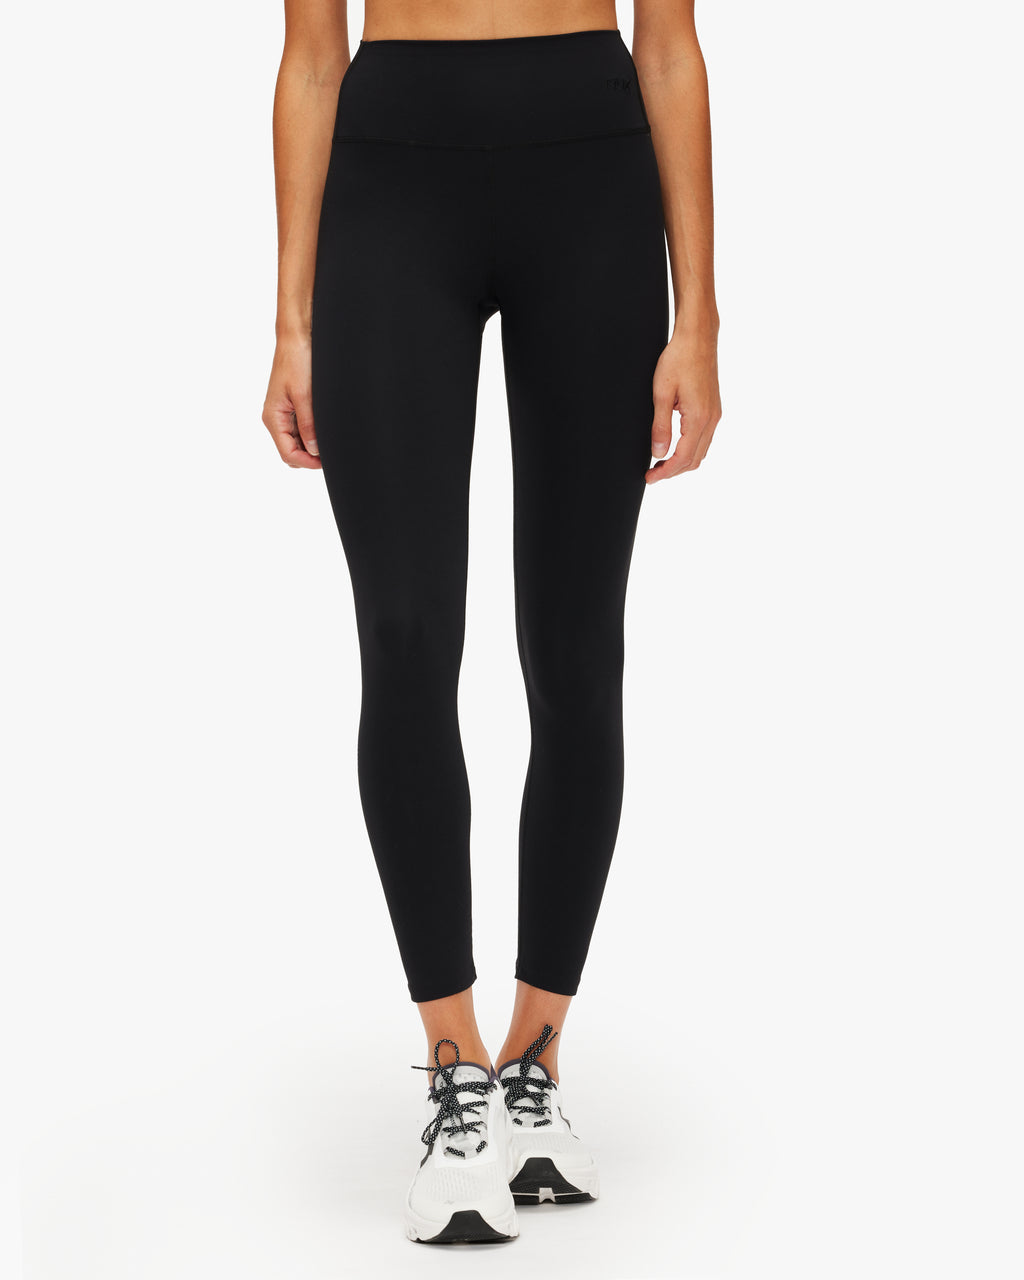 Nux Luxe Leggings - Fitness Incentive %